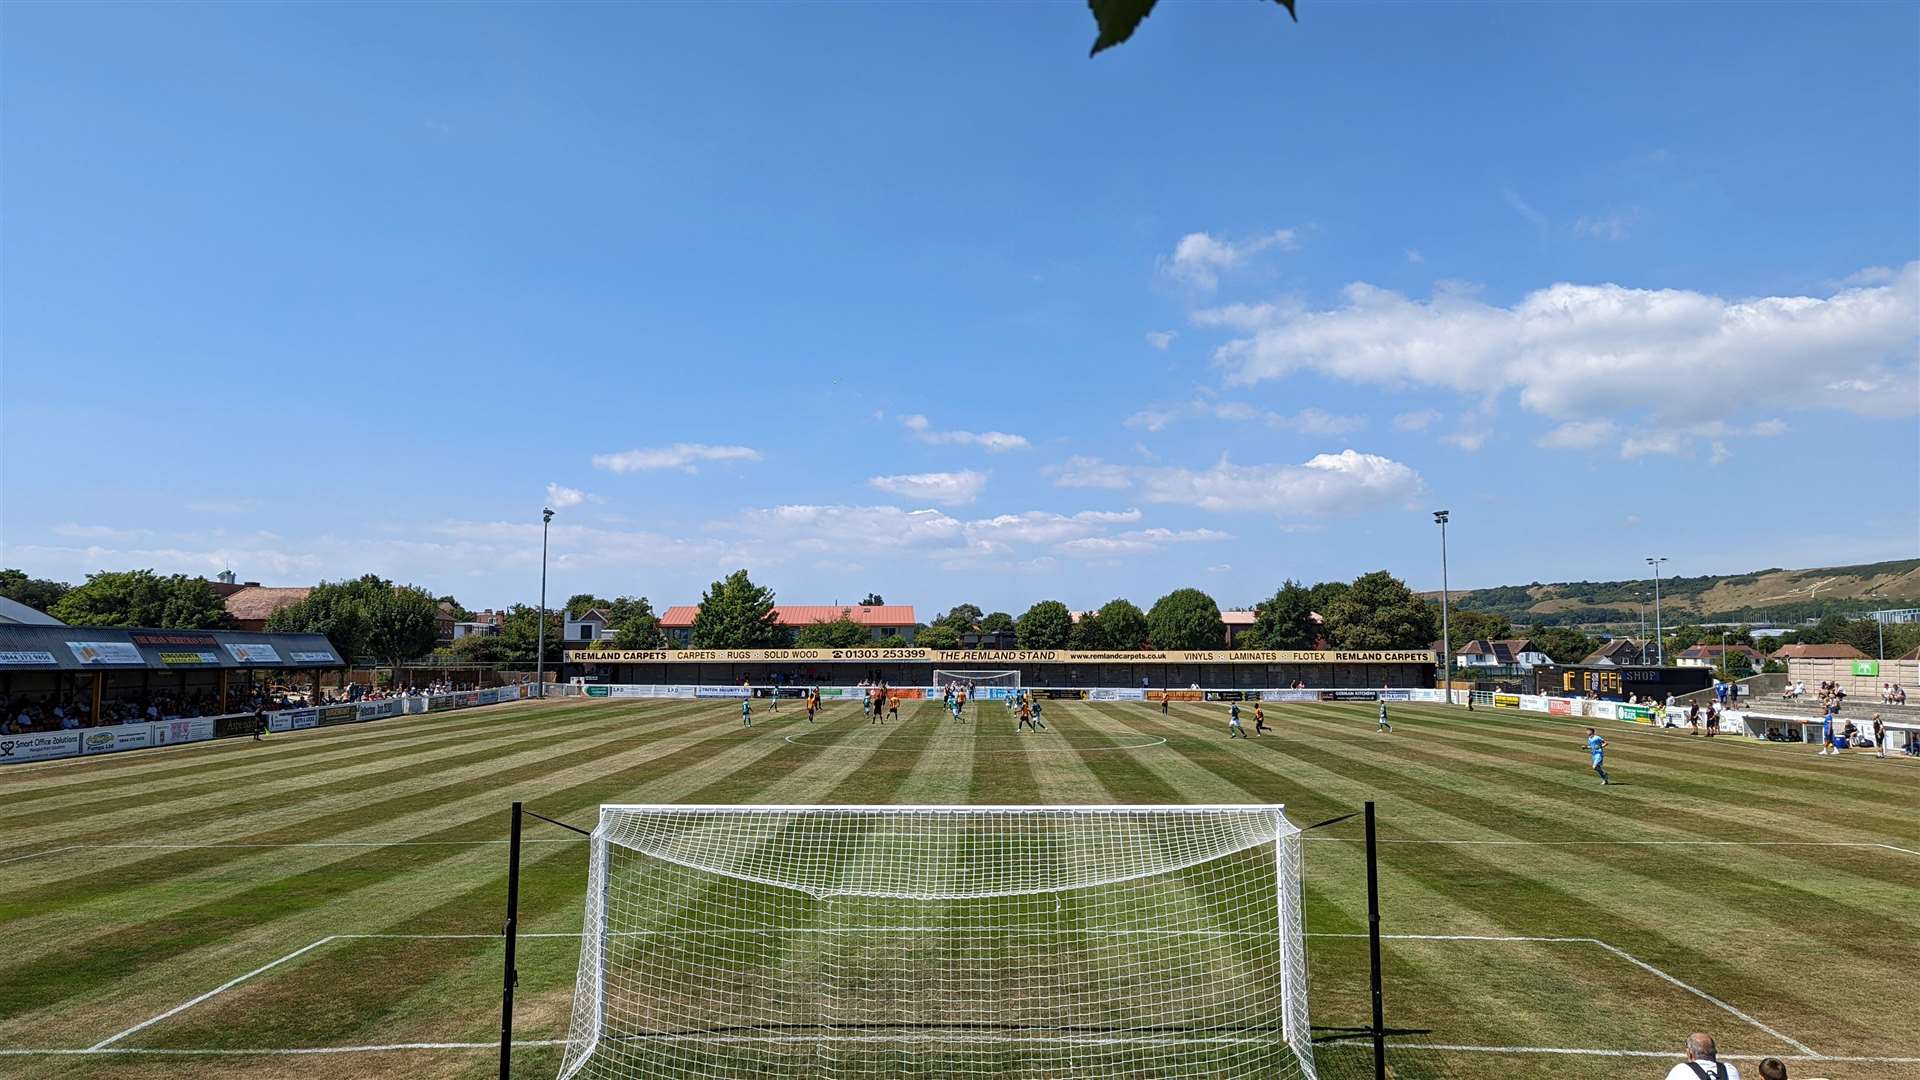 A three-year club ban has been issued after an incident at the Alcaline Stadium, Folkestone